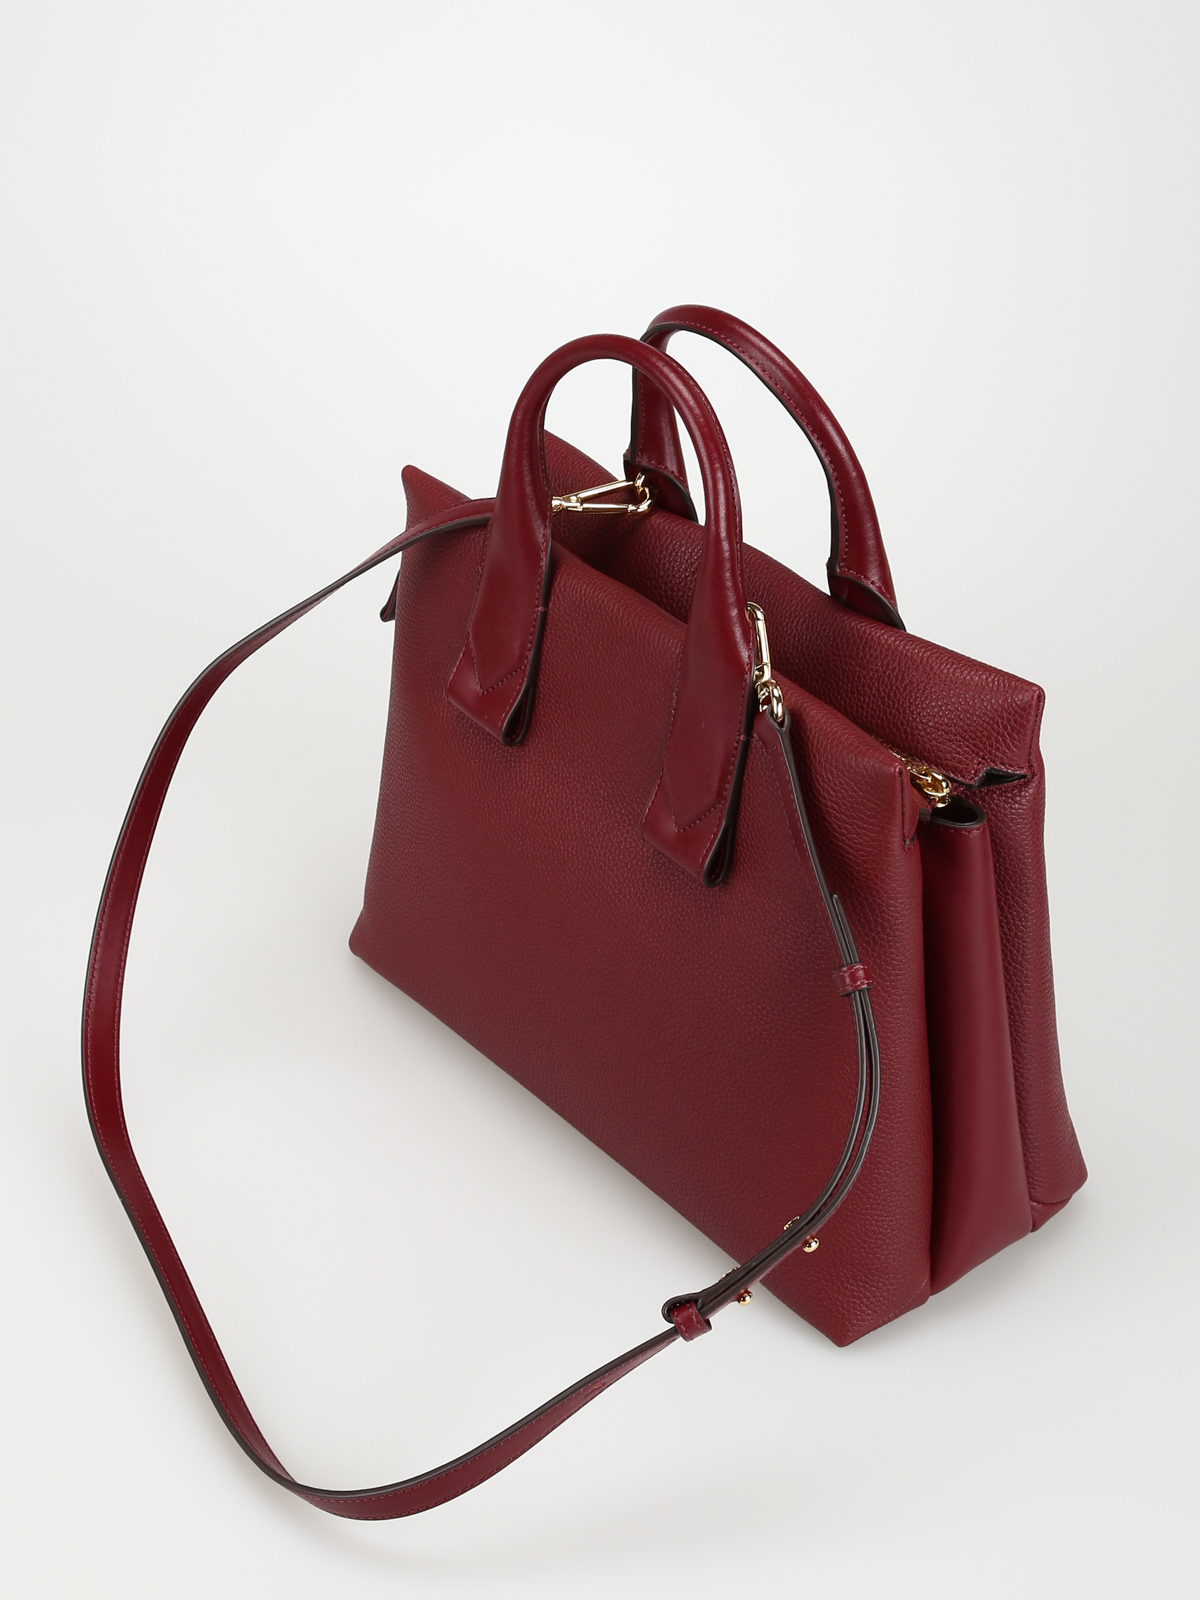 Totes bags Michael Kors - Rollins dark red leather large tote bag ...